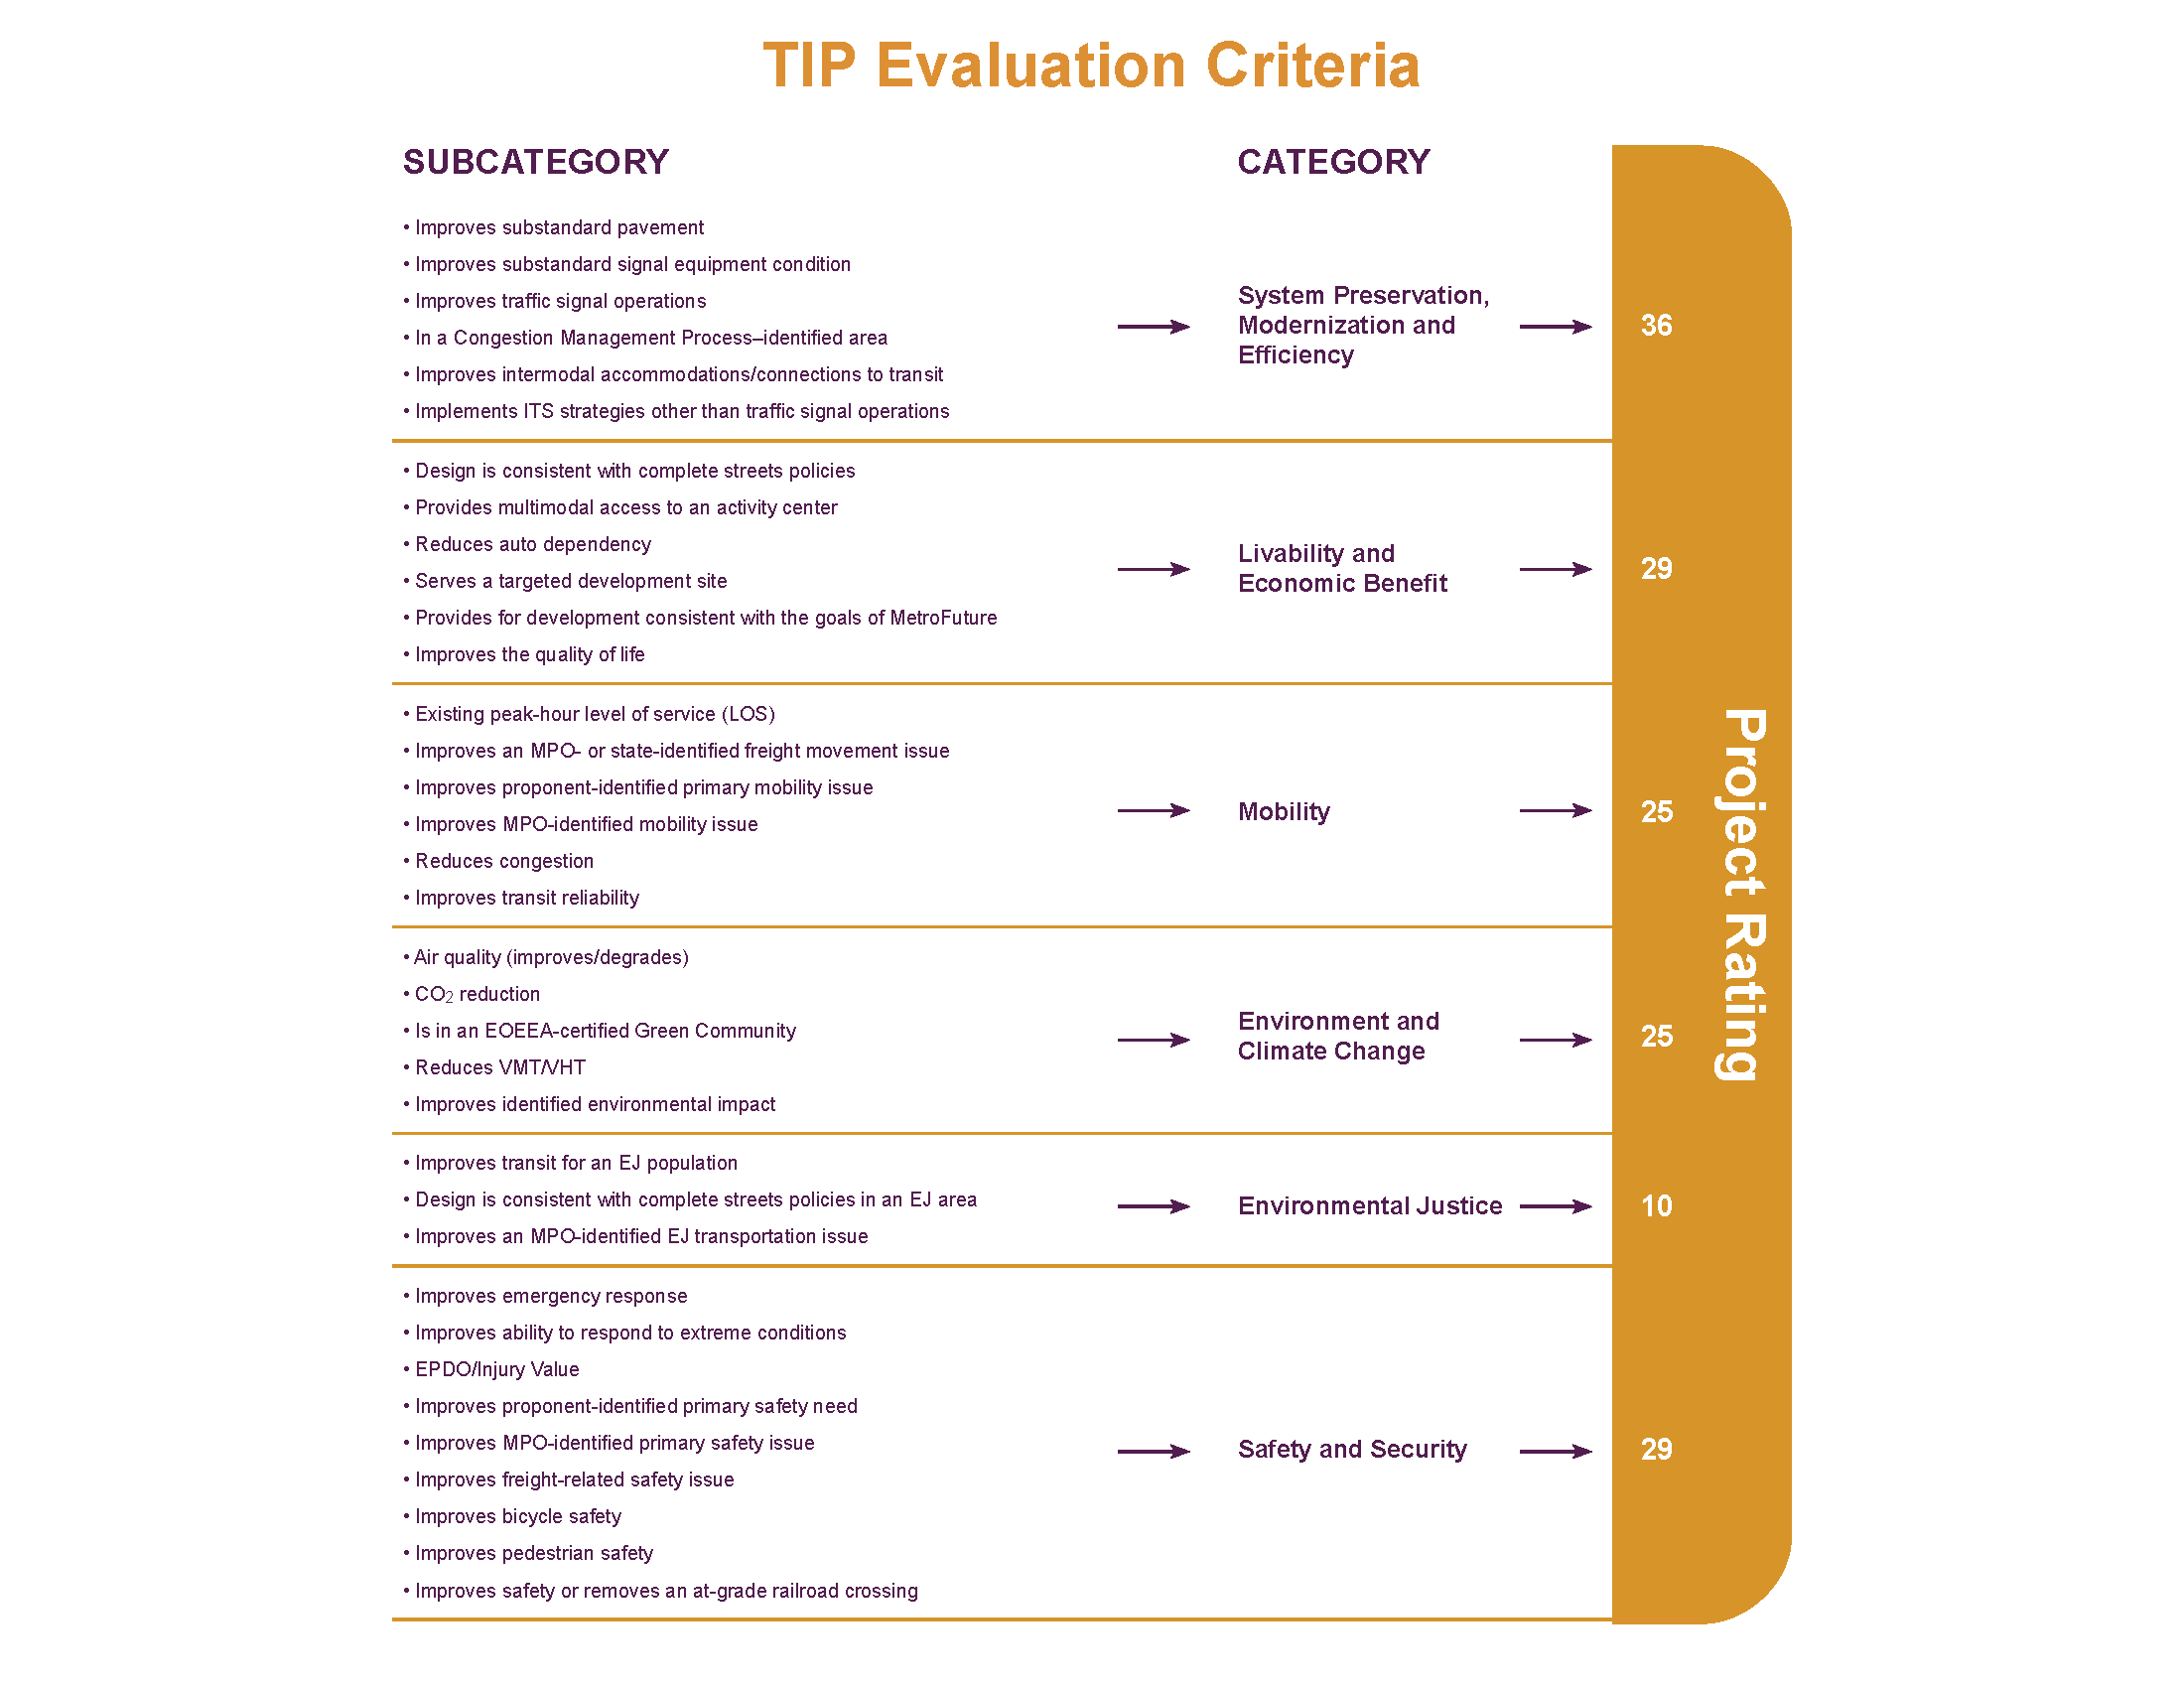 The graphic shows 35 evaluation criteria across six policy categories that the MPO uses to score TIP projects.